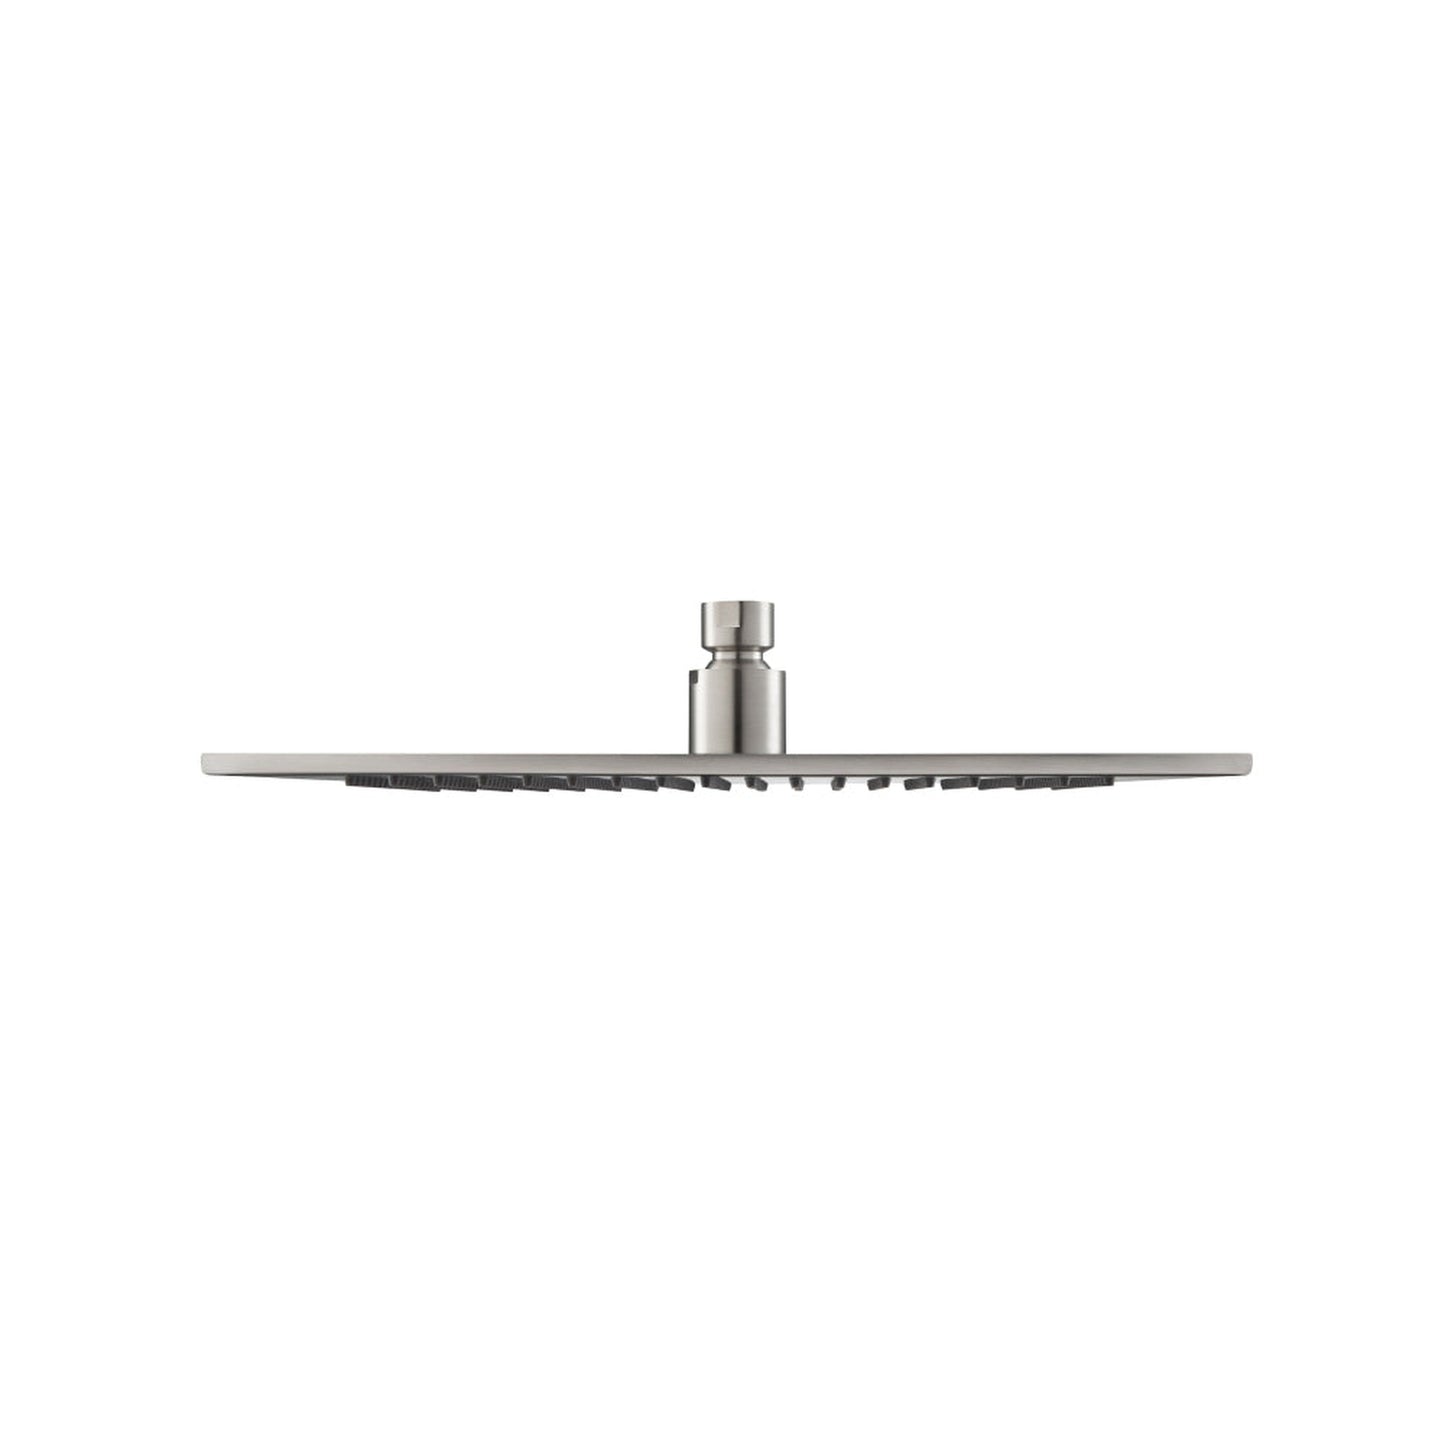 Isenberg Universal Fixtures 12" Single Function Square Brushed Nickel PVD Solid Brass Rain Shower Head With 6" Ceiling Mounted Shower Arm